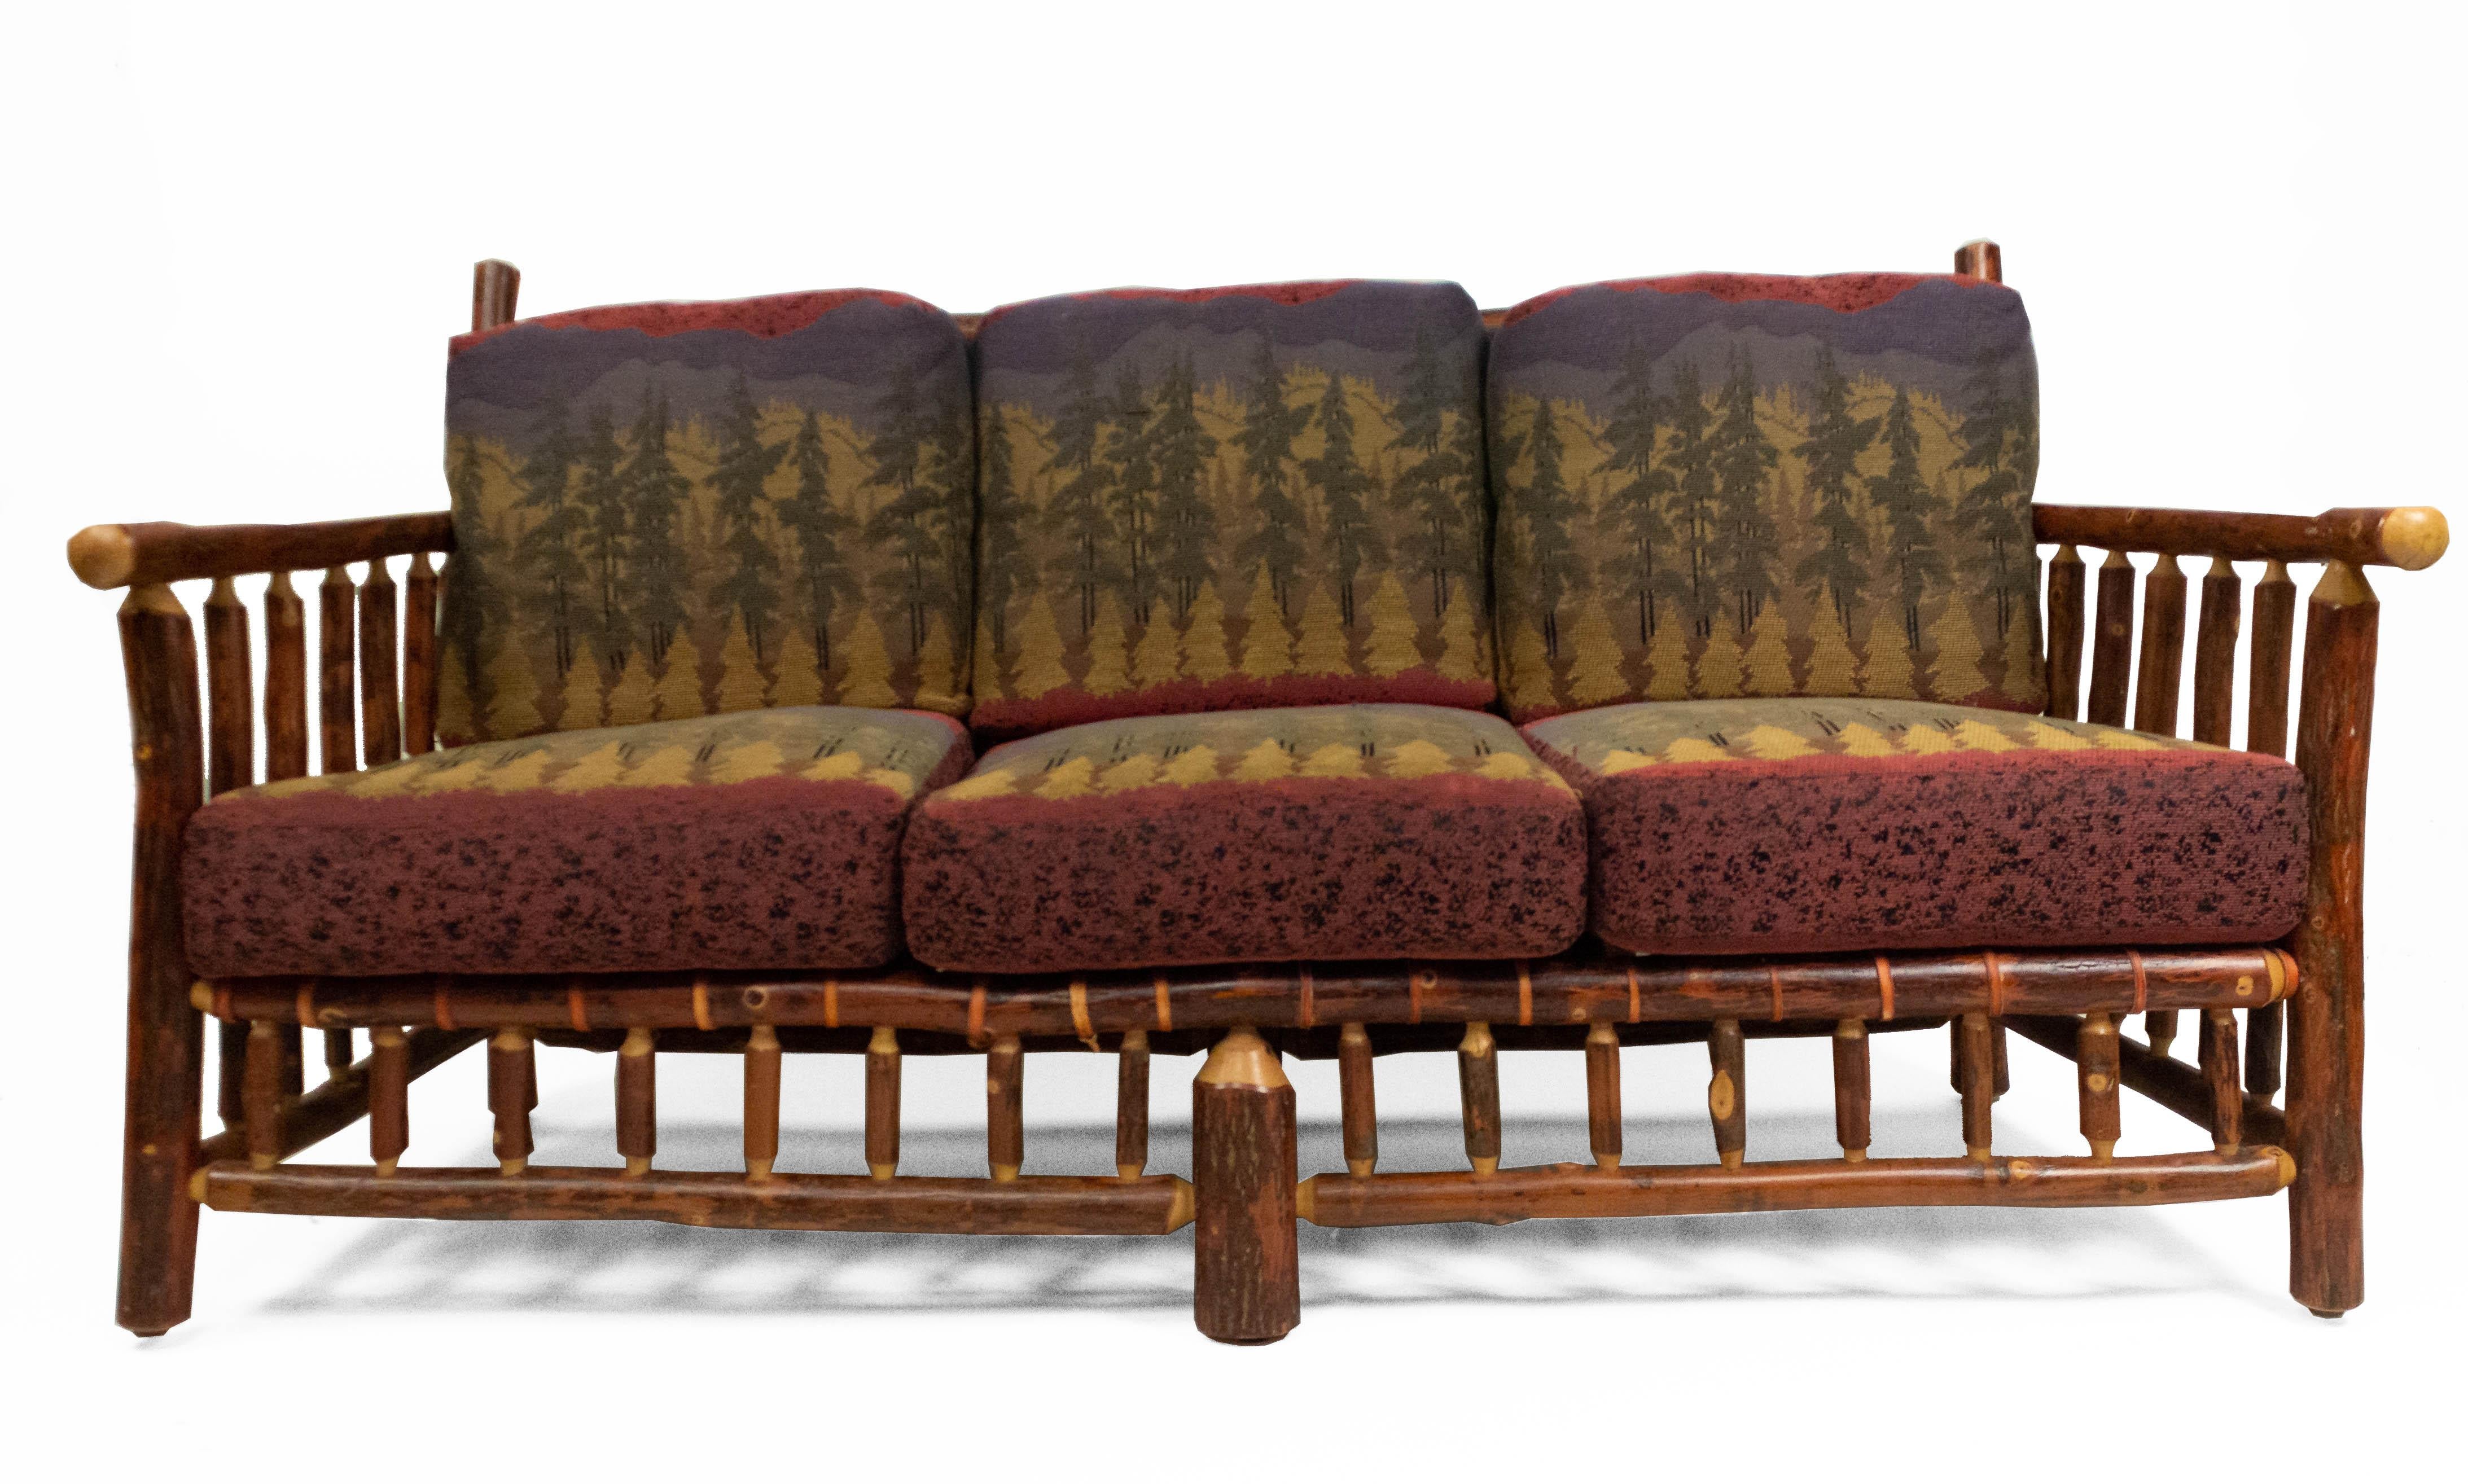 Rustic Old Hickory style (20th Cent) sofa / settee with spindle design sides, back, & base with 6 forest print upholstered cushions (brass Old Hickory tag).
   